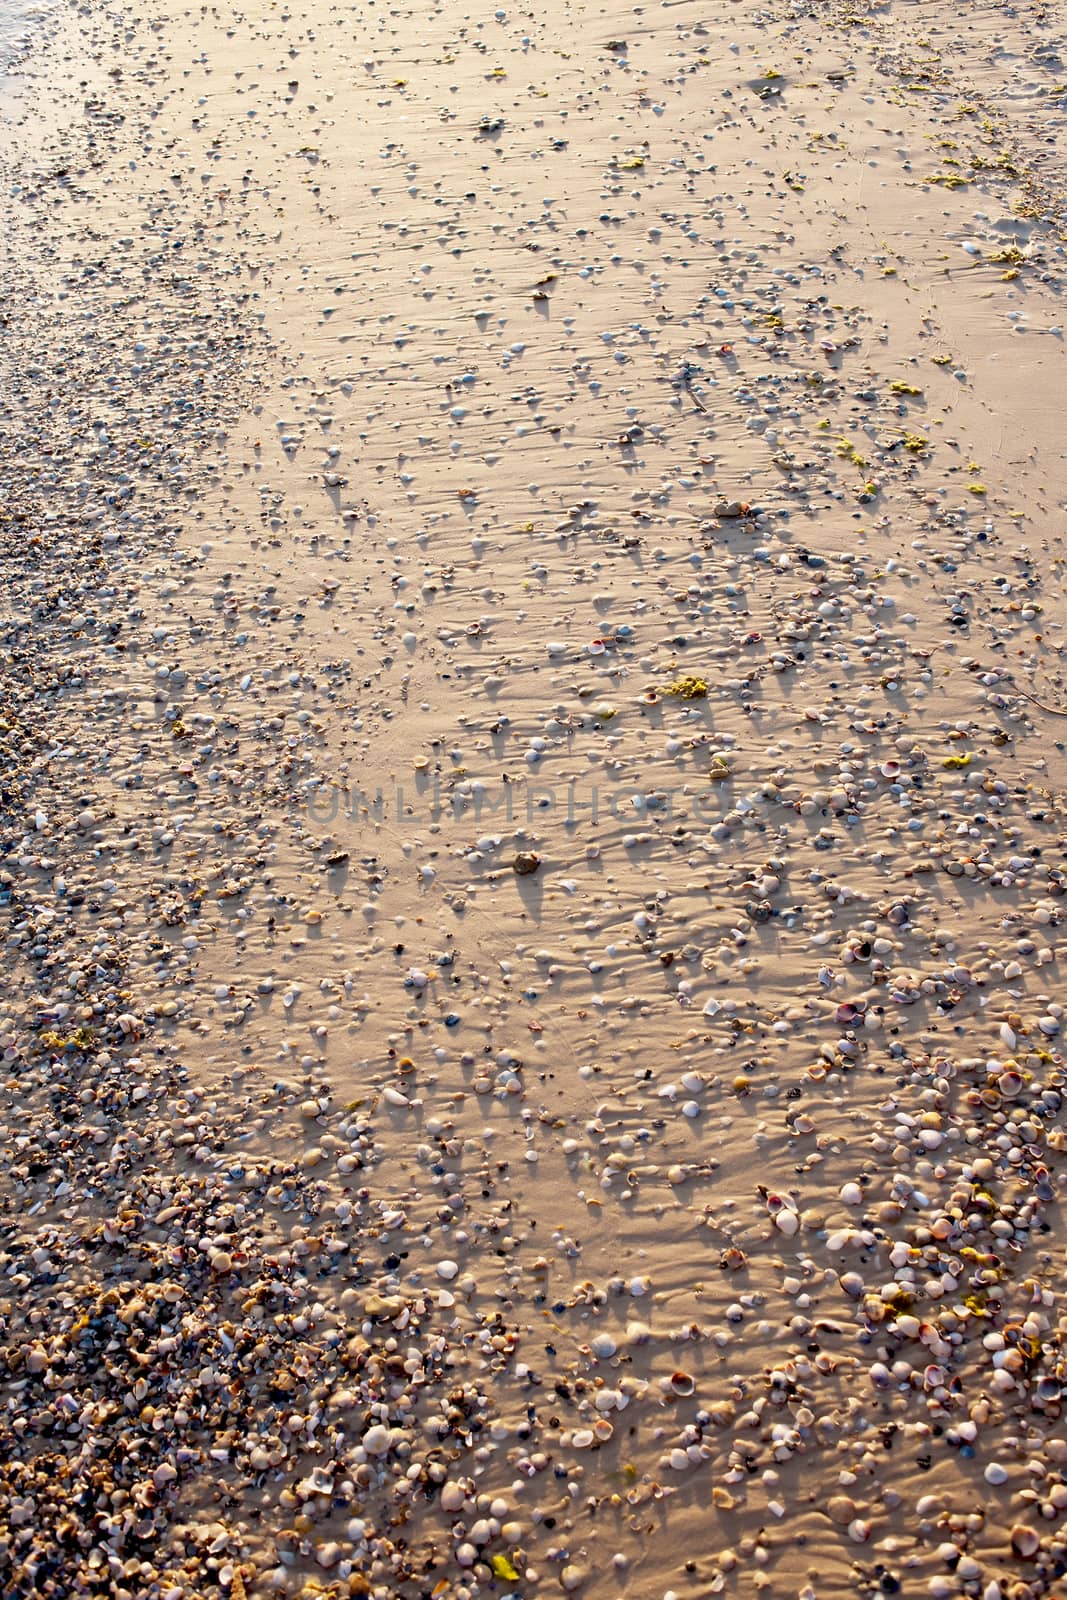 Background image in the form of sand with shells on the sea shore station at sunset